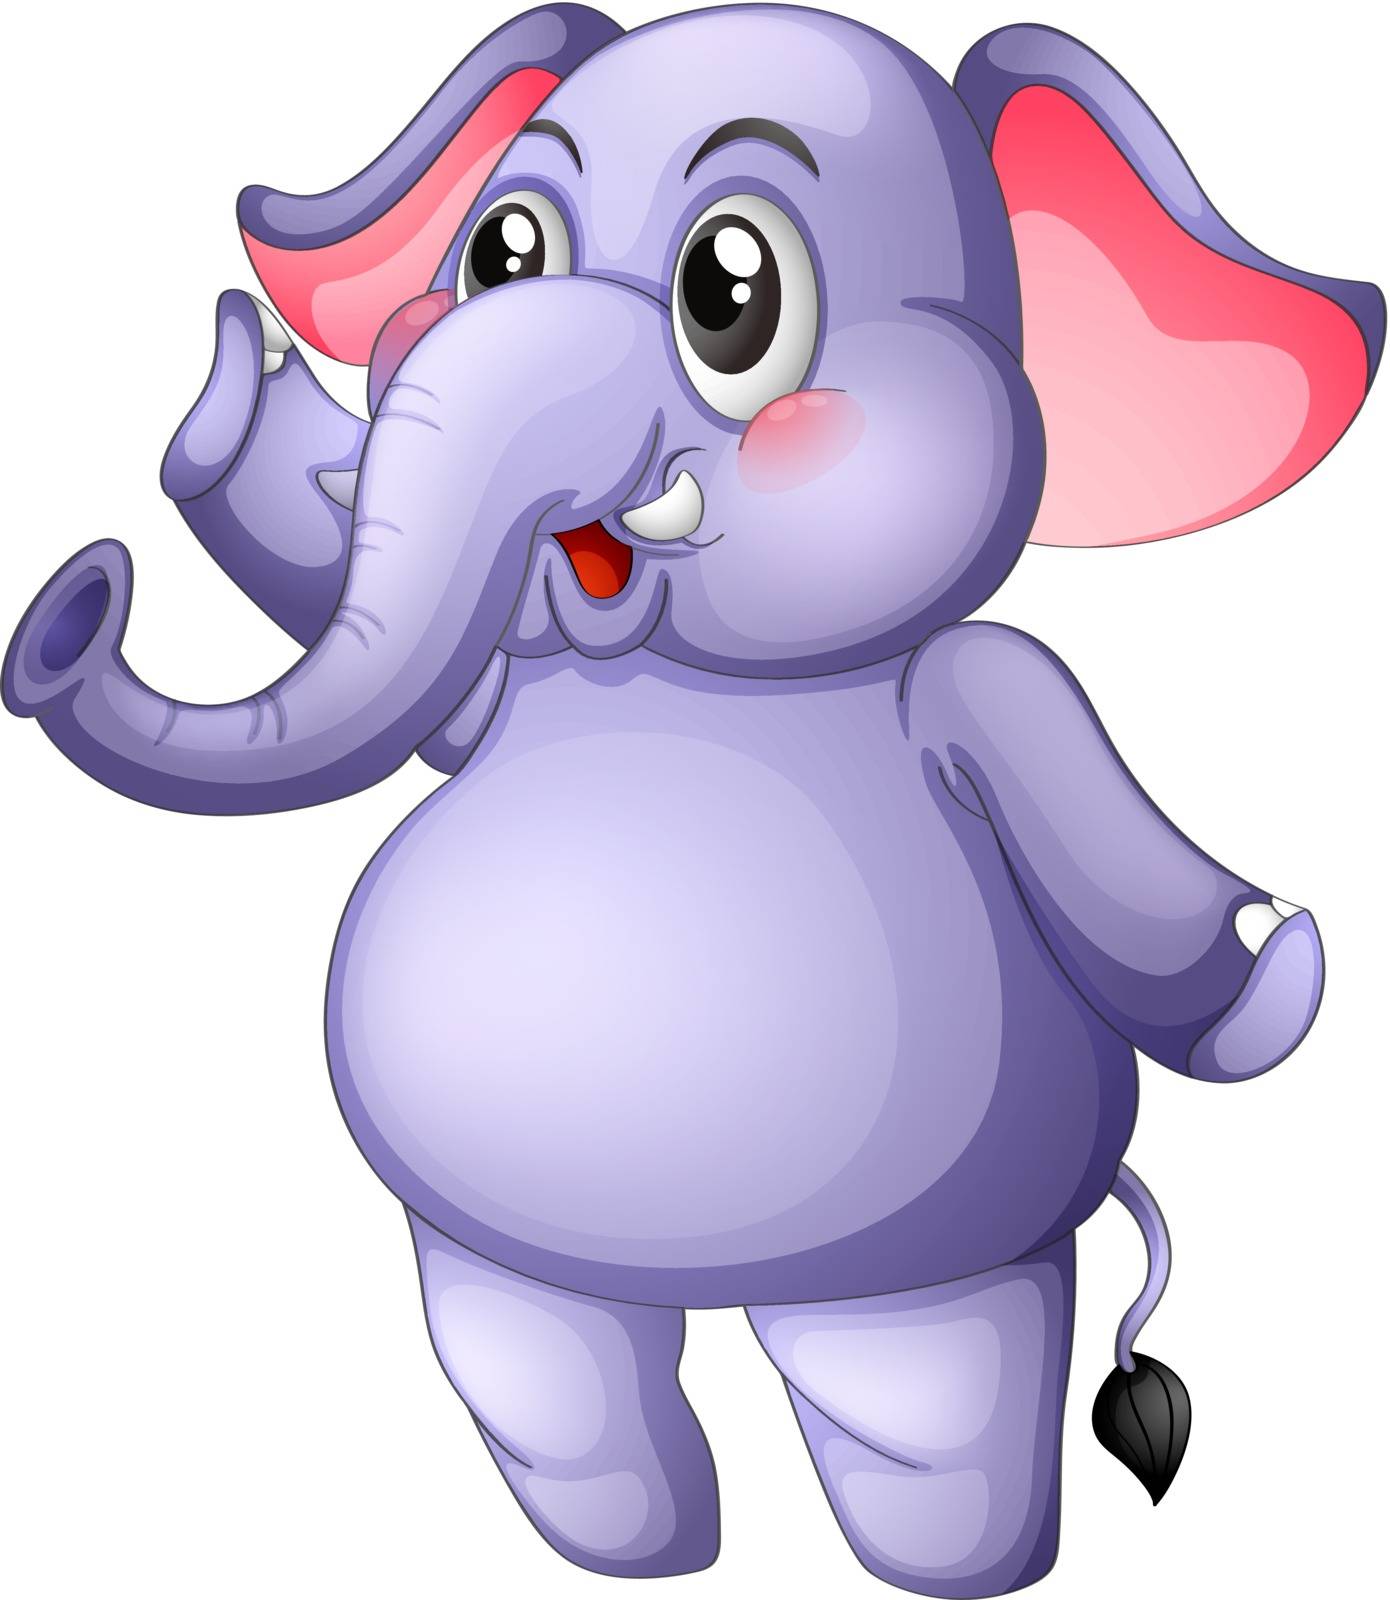 Illustration of a young gray elephant on a white background